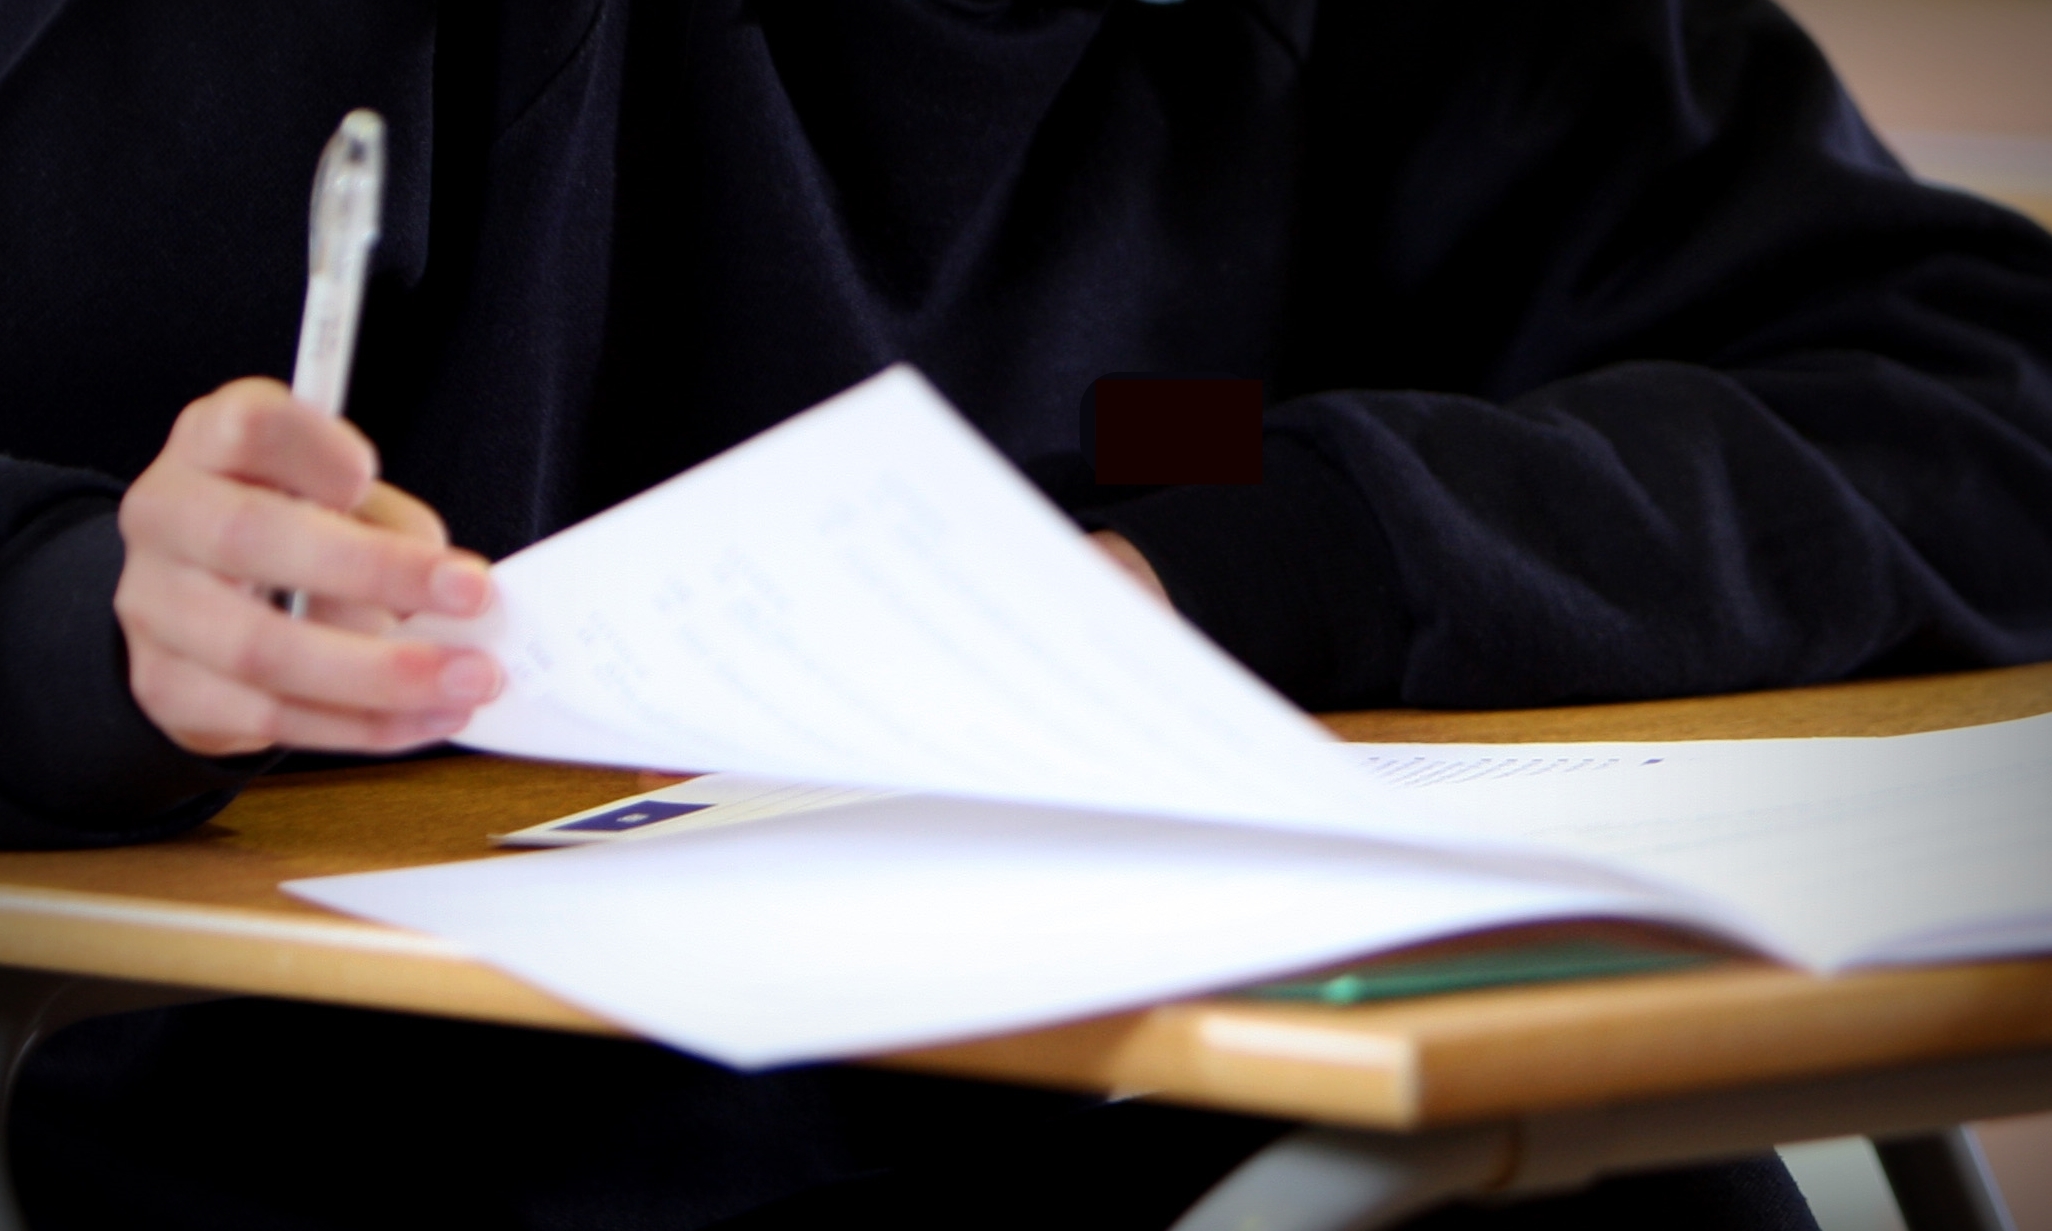 Almost one in 20 pupils in Dundee left school without passing an exam last year at SCQF 3.